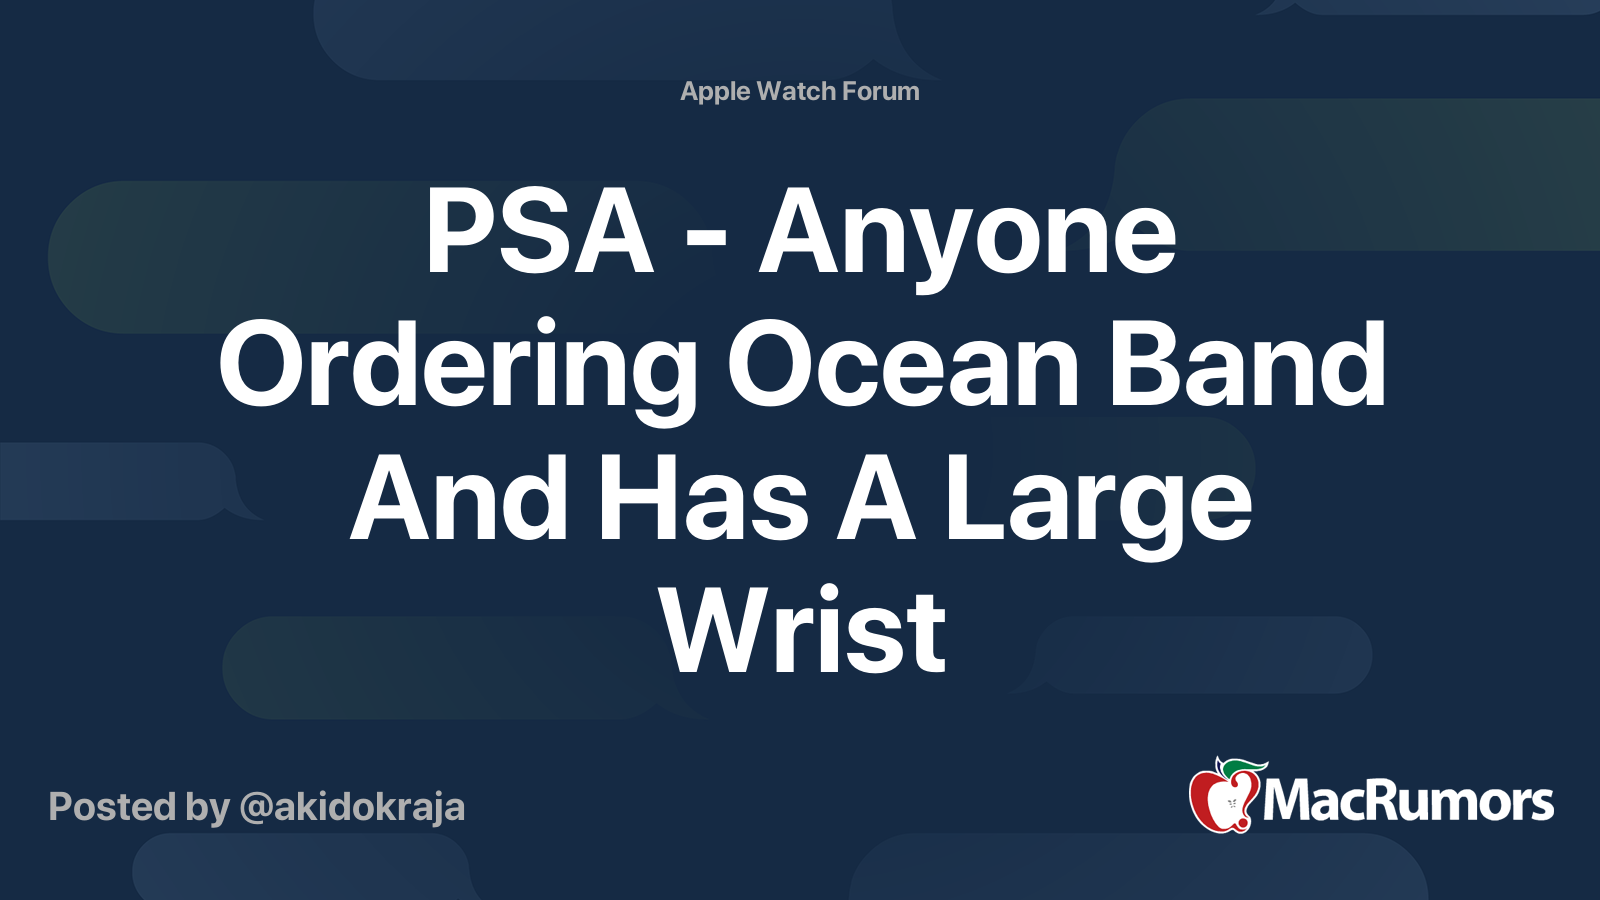 PSA - Anyone Ordering Ocean Band And Has A Large Wrist